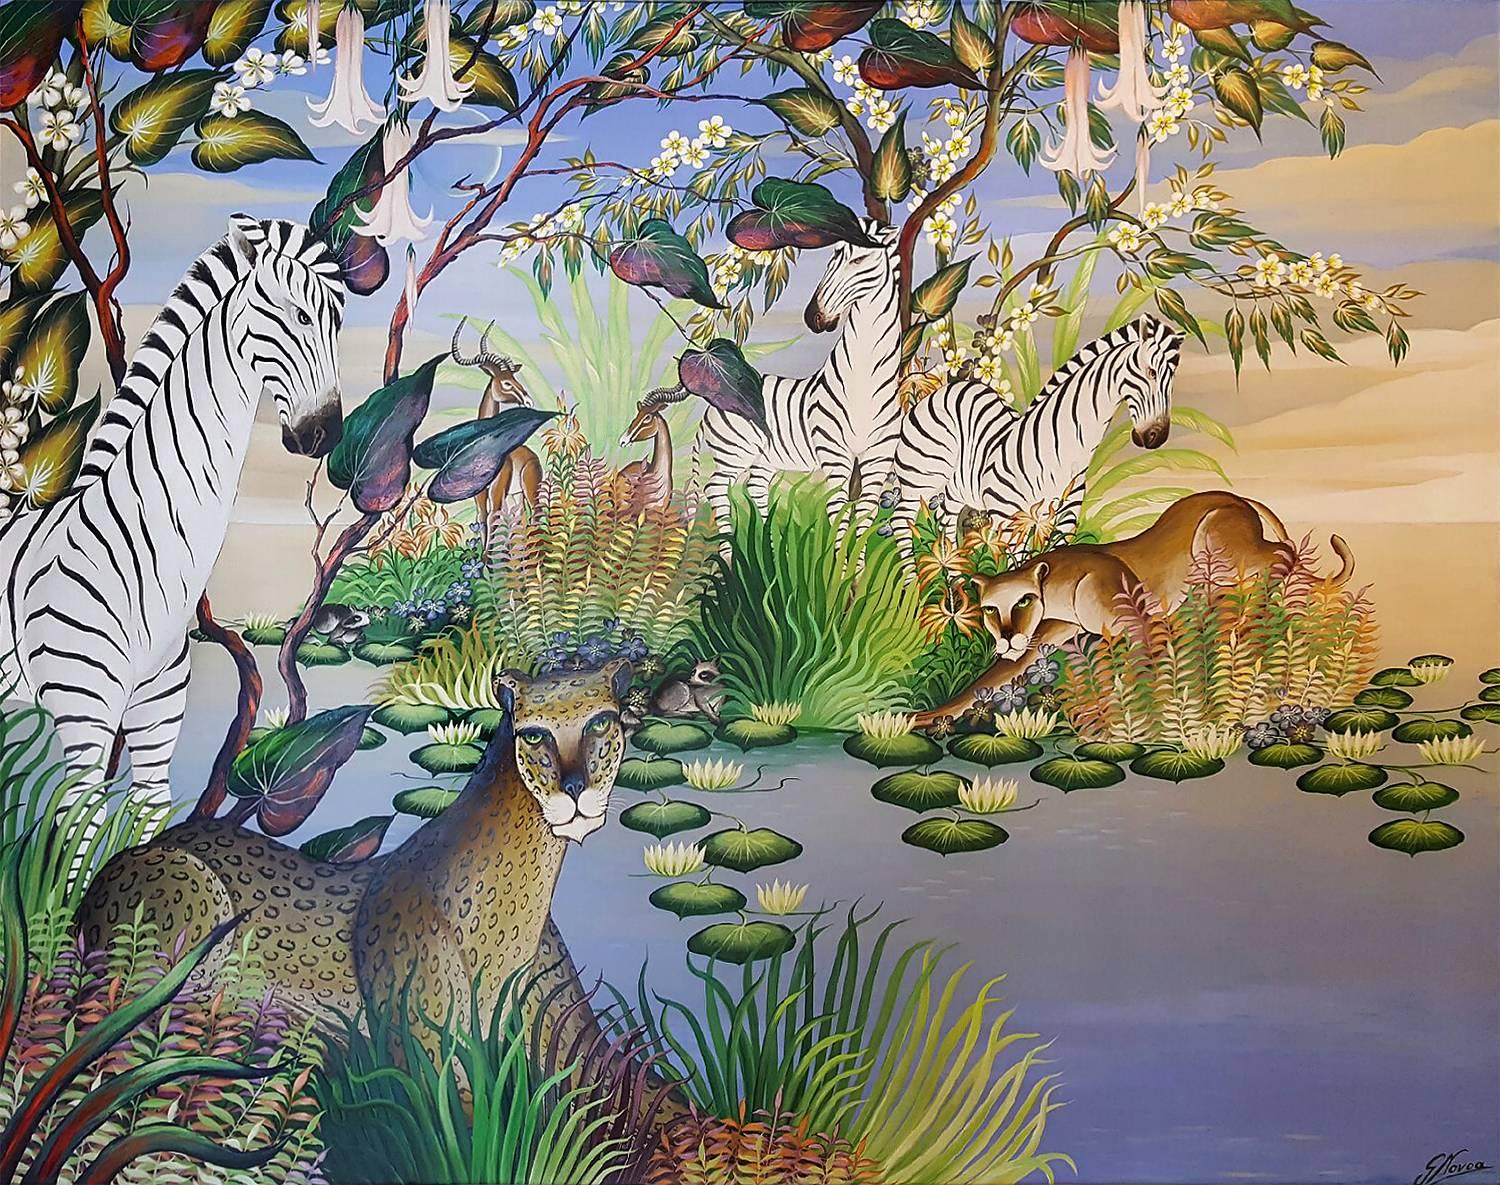 Tropical Jungle,  Tiger, Zebra, Leopard, Jungle  Animals  Panther - Painting by Gustavo Novoa